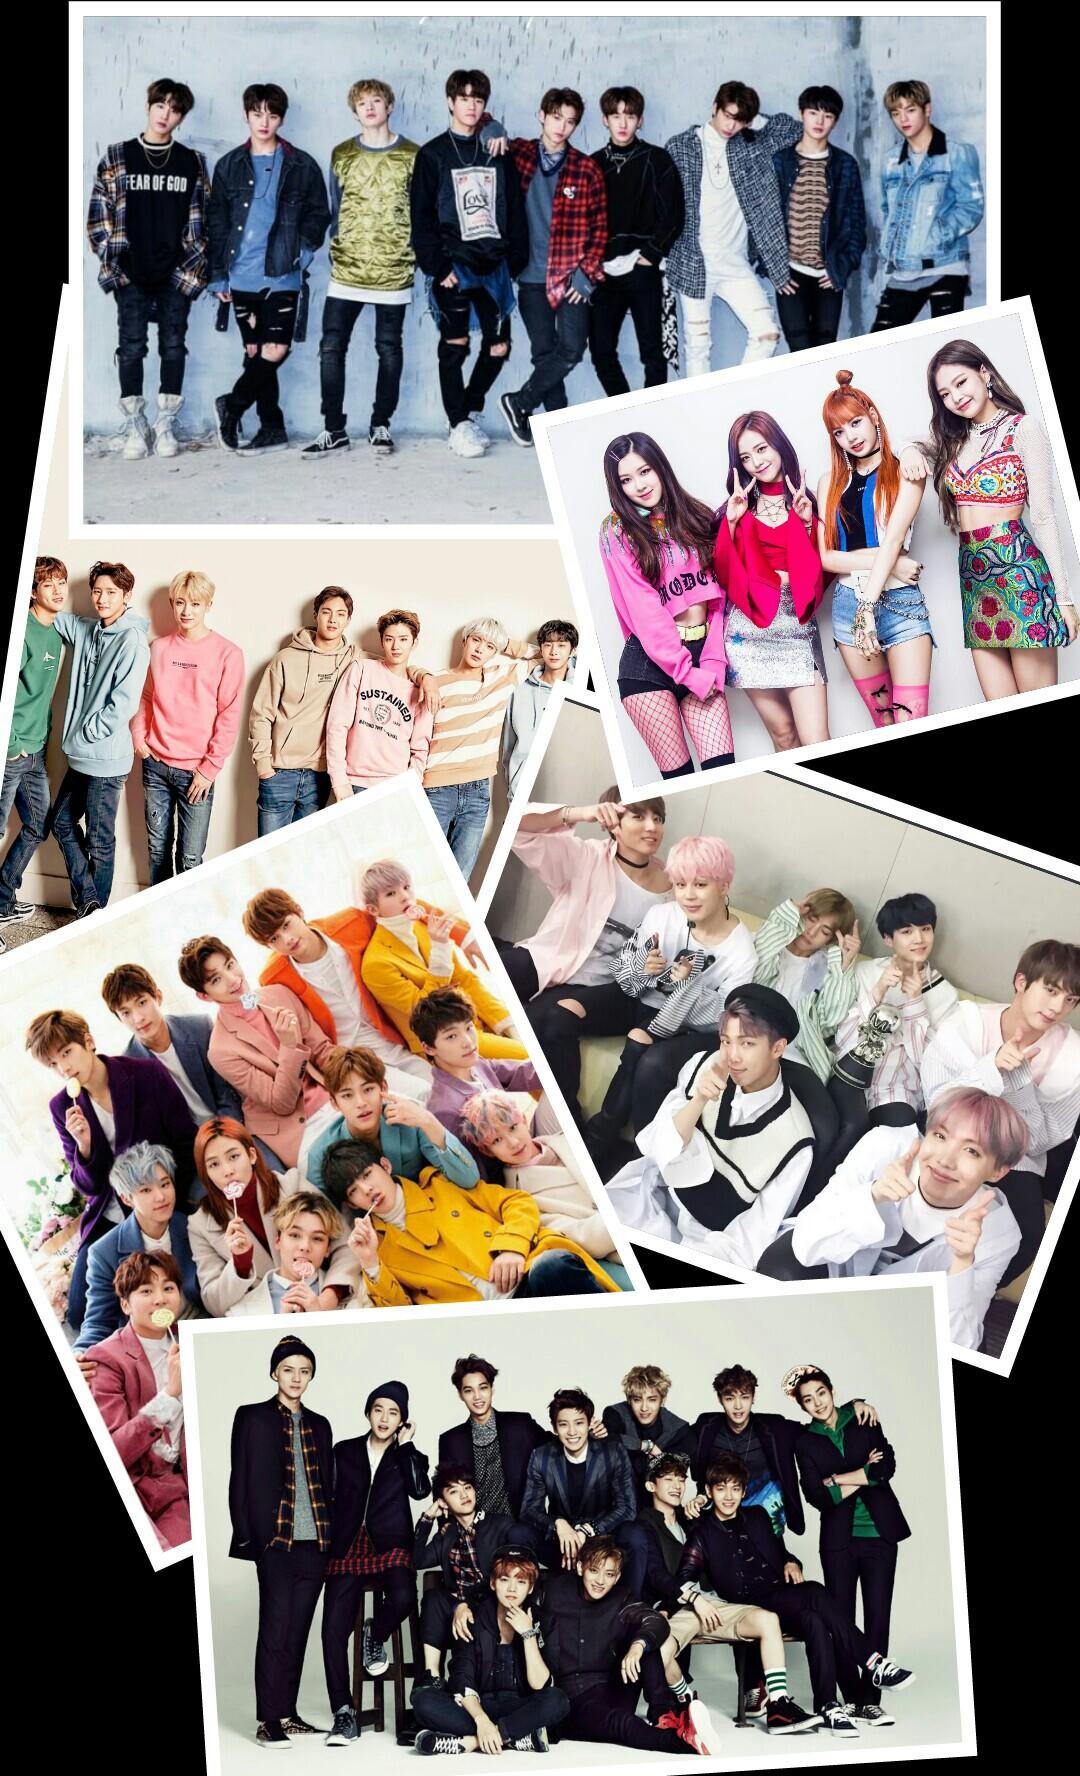 My bias groups, aka the ones I will be posting about. Bts, Exo, Seventeen, Stray Kids, Monsta X, and BlackPink